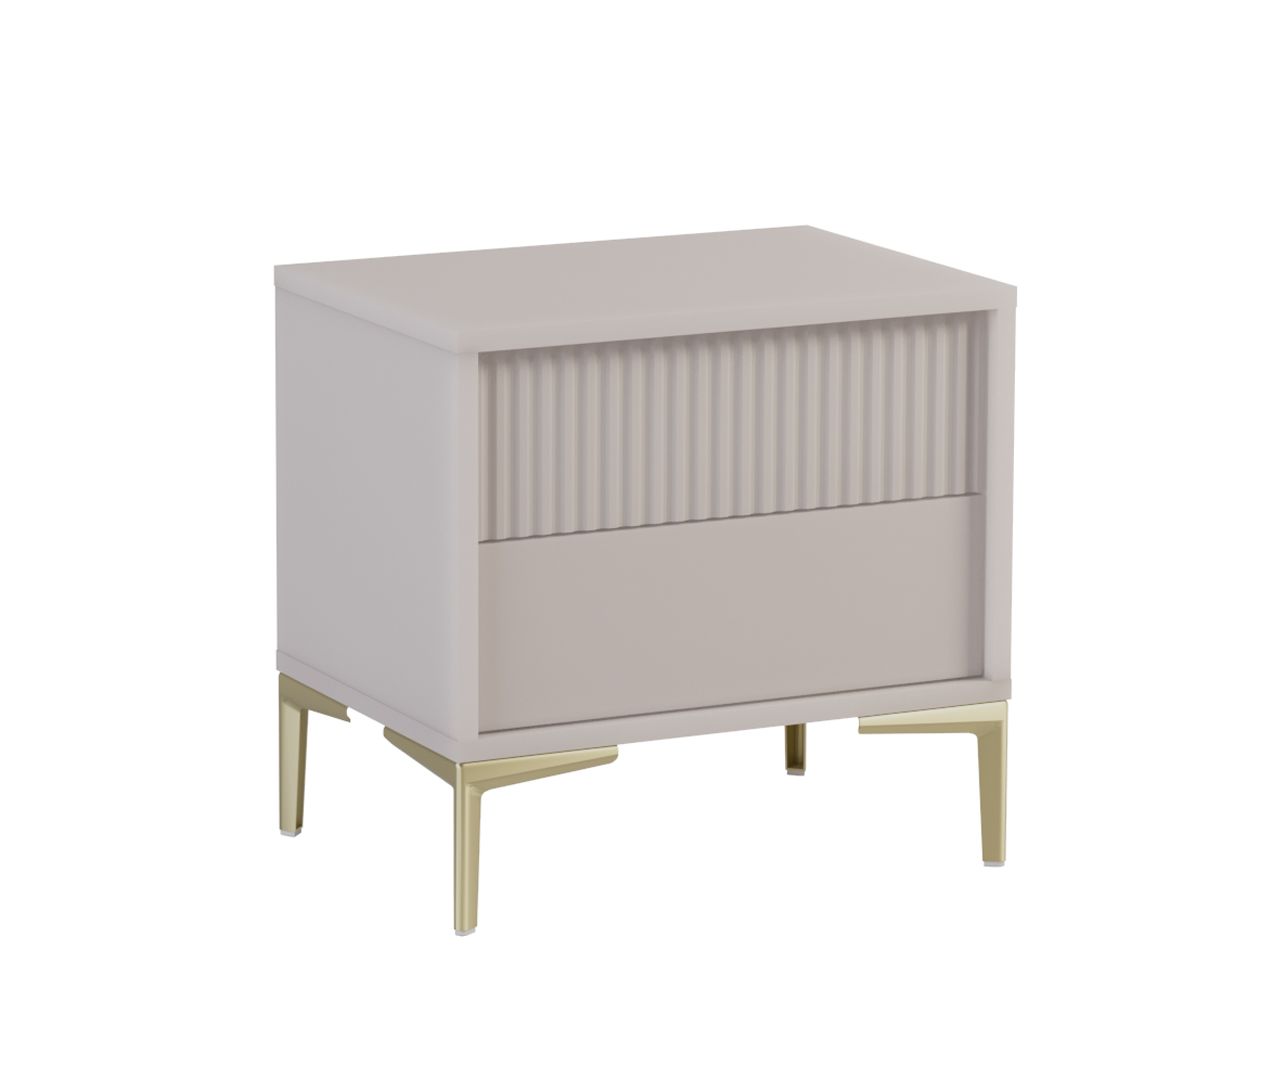 Chabrey 03 bedside cabinet with 2 drawers with push-to-open function, 51.5 x 53.5 x 38 cm, color: beige, metal feet in gold, ABS edge protection 